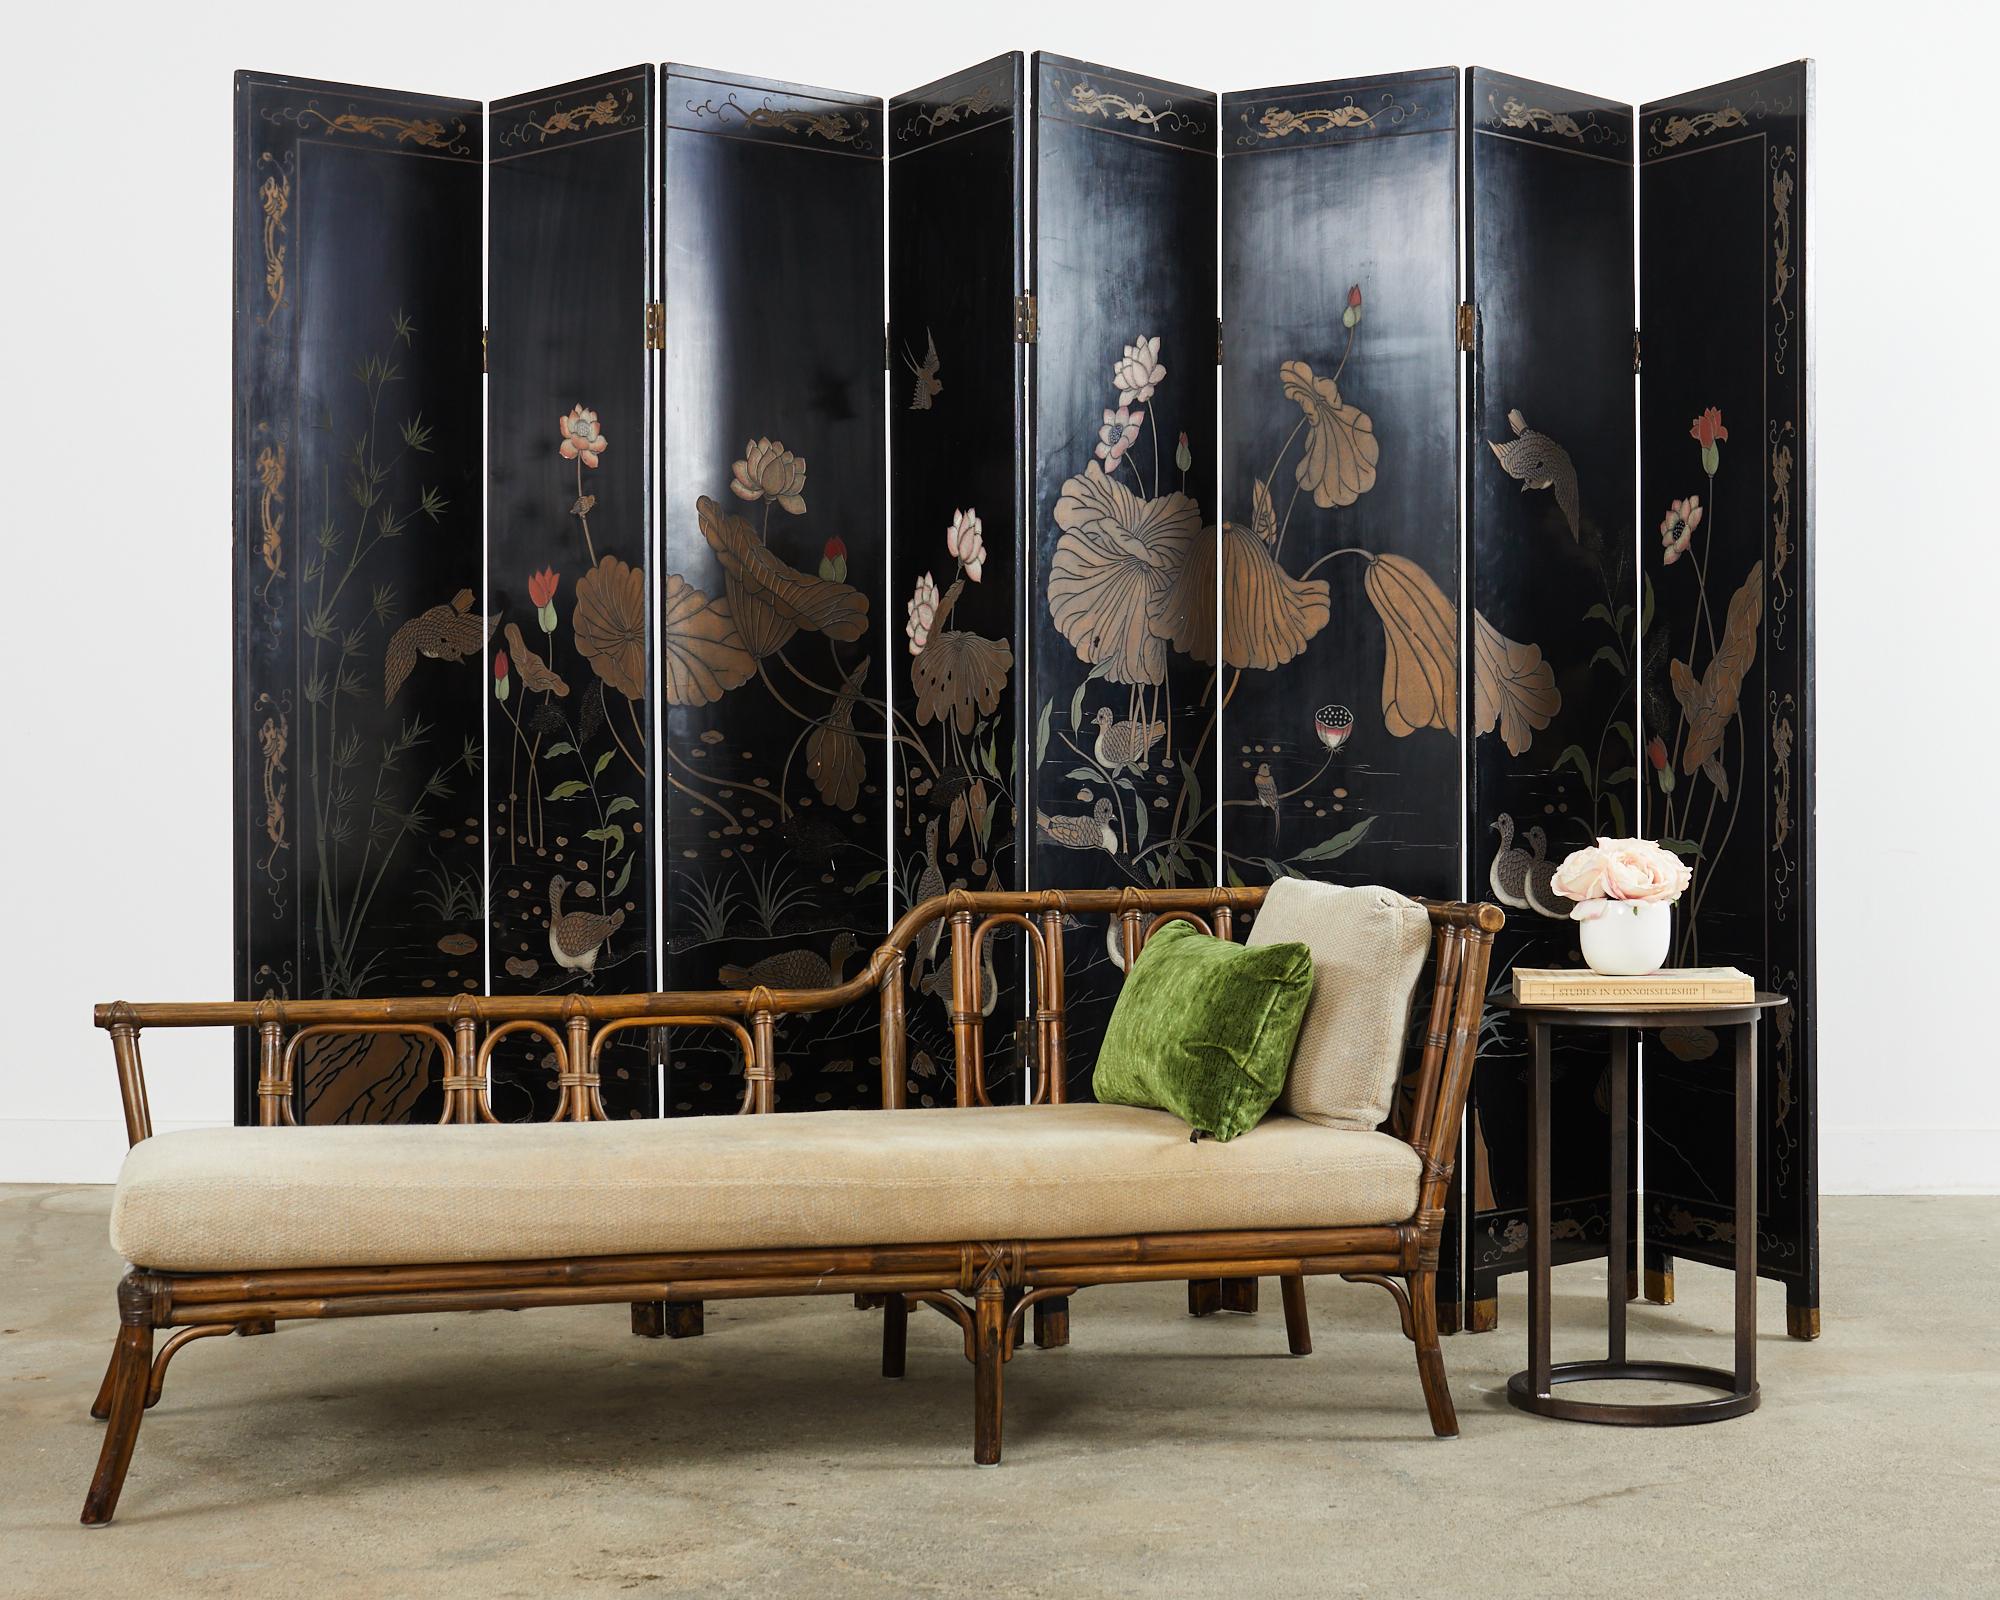 Grand Chinese export post republic period eight panel coromandel screen featuring a waterscape decorated with blossoming lotus and birds. The screen measures over 12 feet laid out flat with eight panels covered with lacquer, incised and painted with